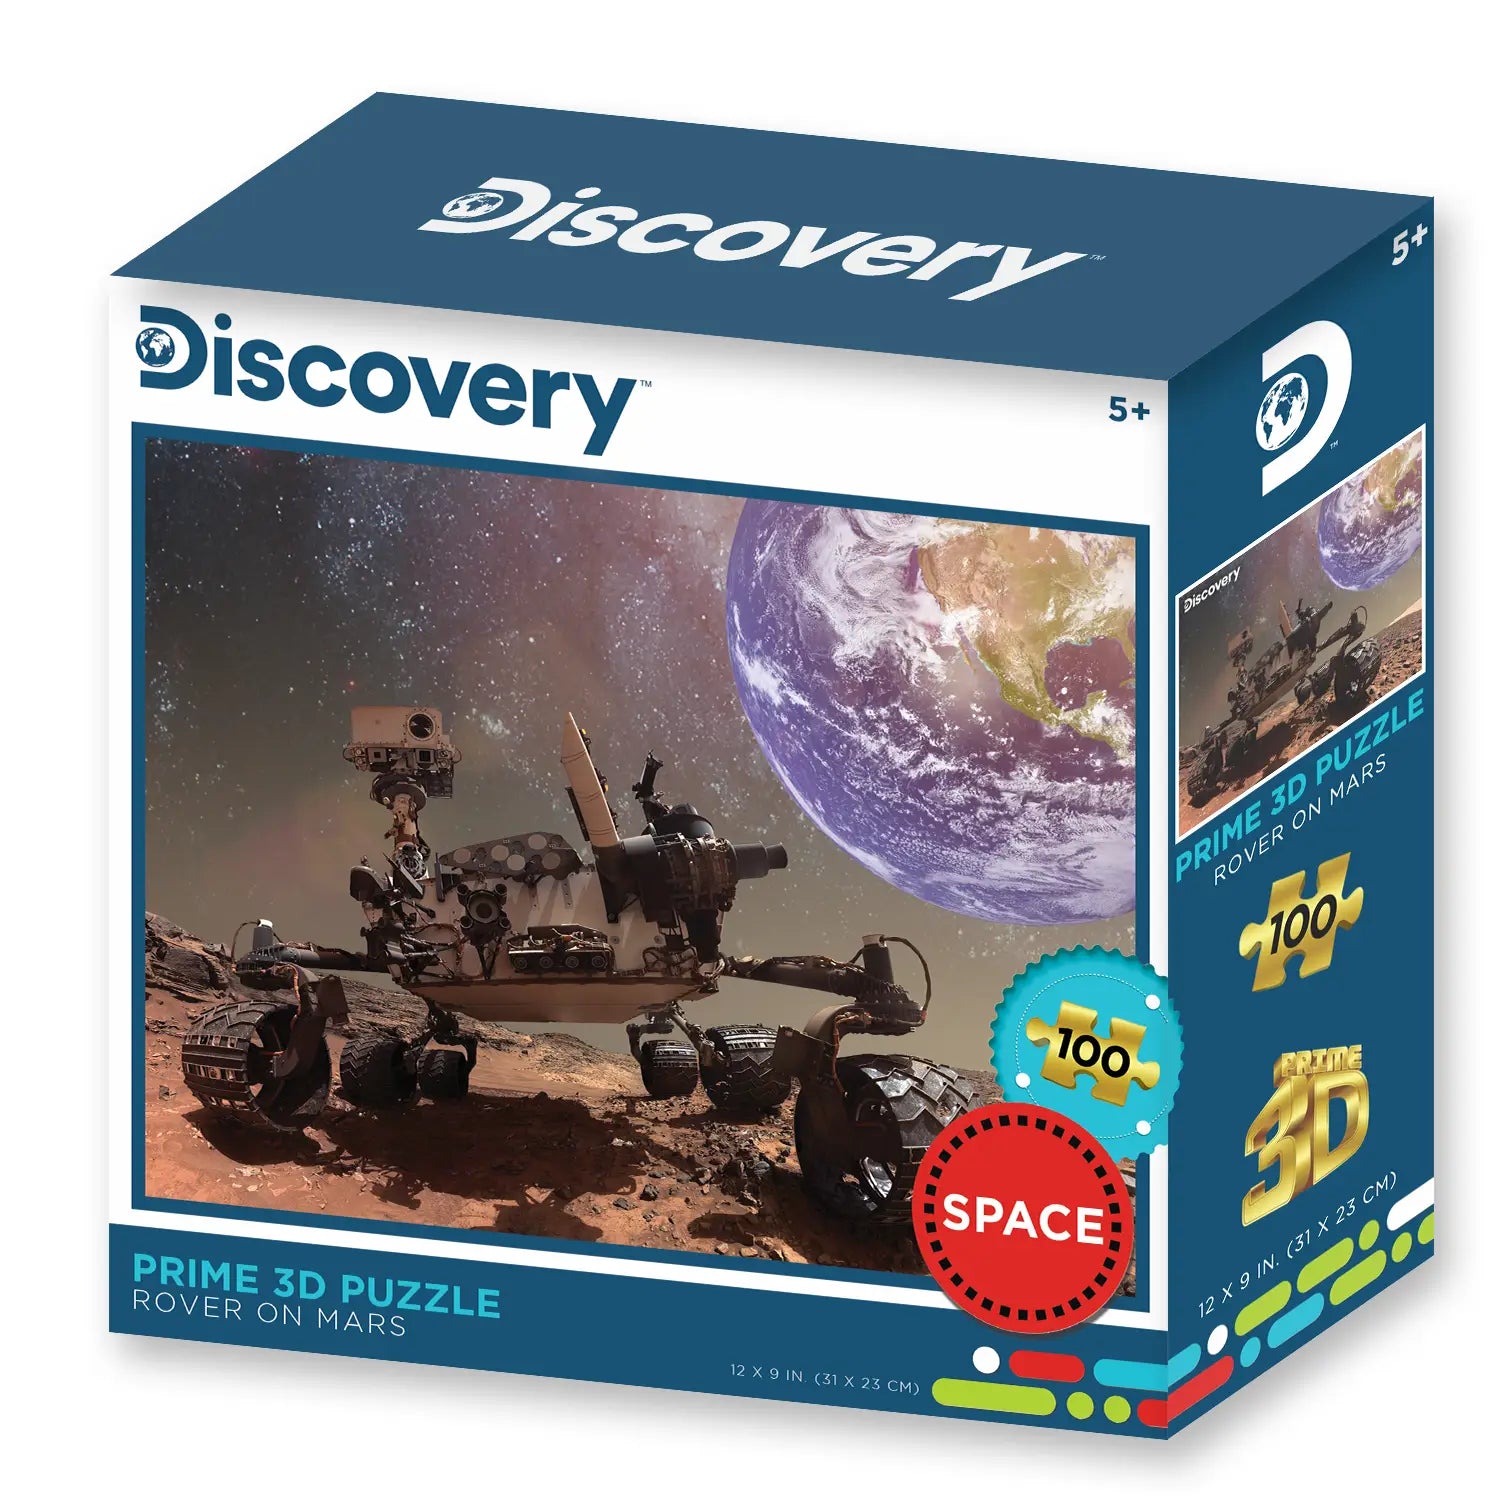 Prime 3D Discovery Rover on Mars 100 Piece Jigsaw Puzzle